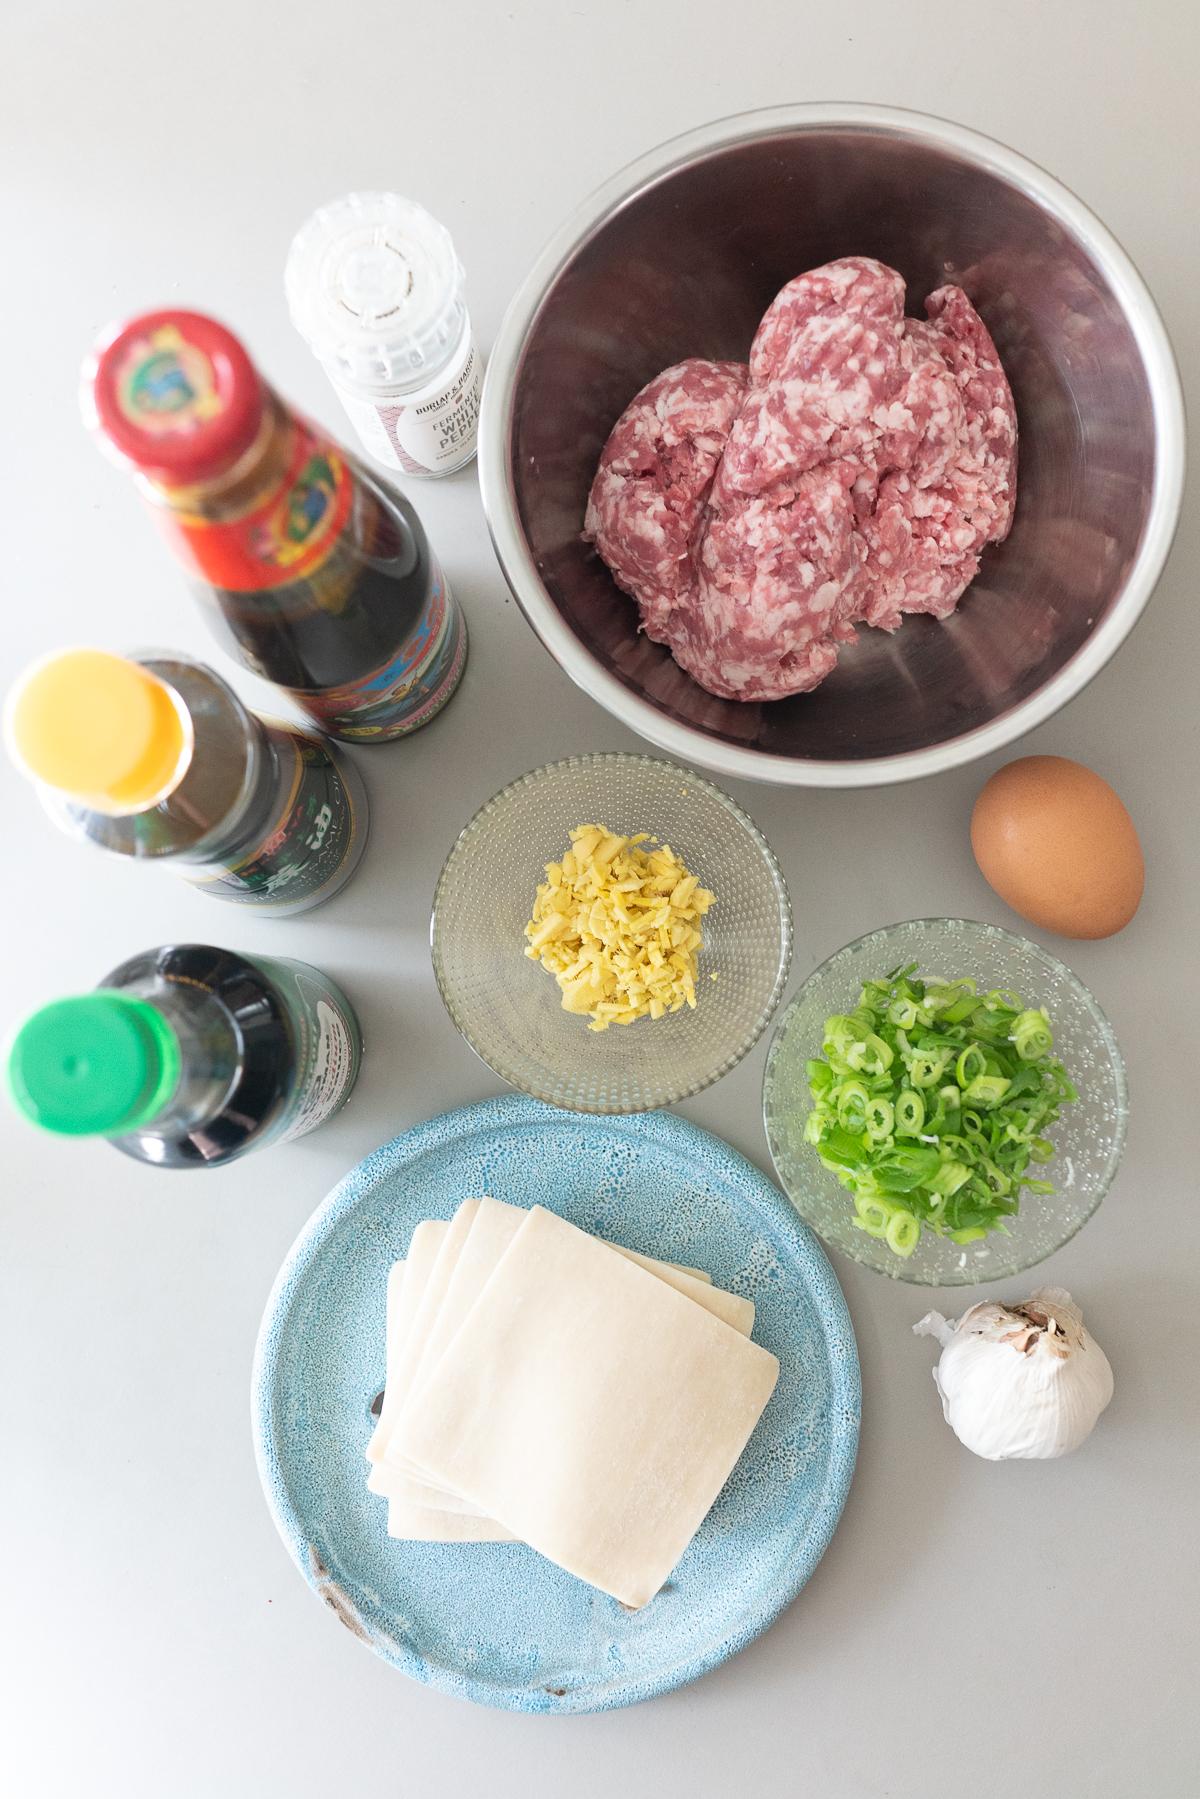 Ingredients to make pork wontons (ground pork, soy sauce, sesame oil, oyster sauce, egg, green onions, garlic, ginger, and square wonton wrappers